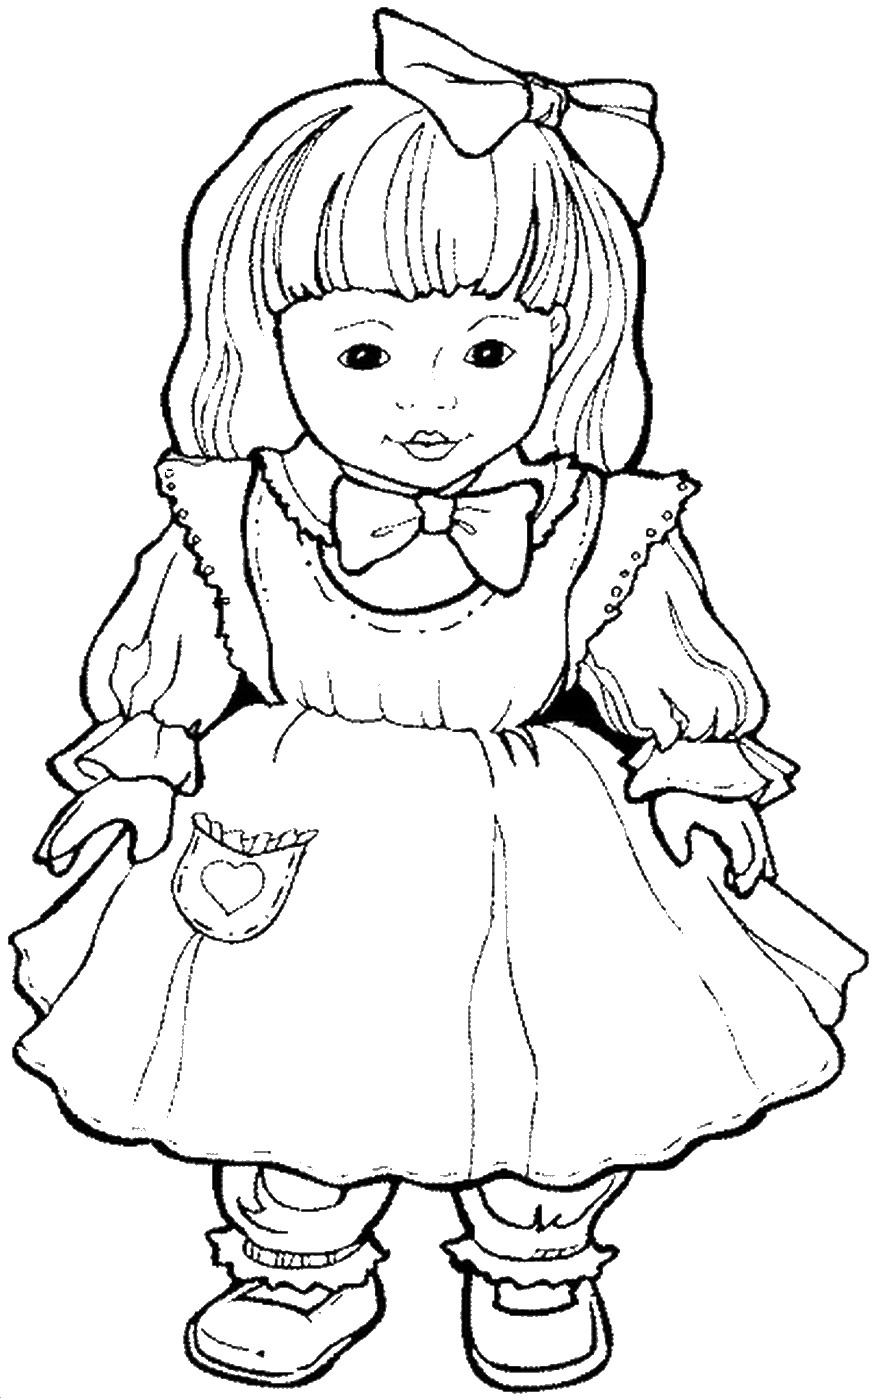 Doll Coloring Pages For Kids Coloring Pages